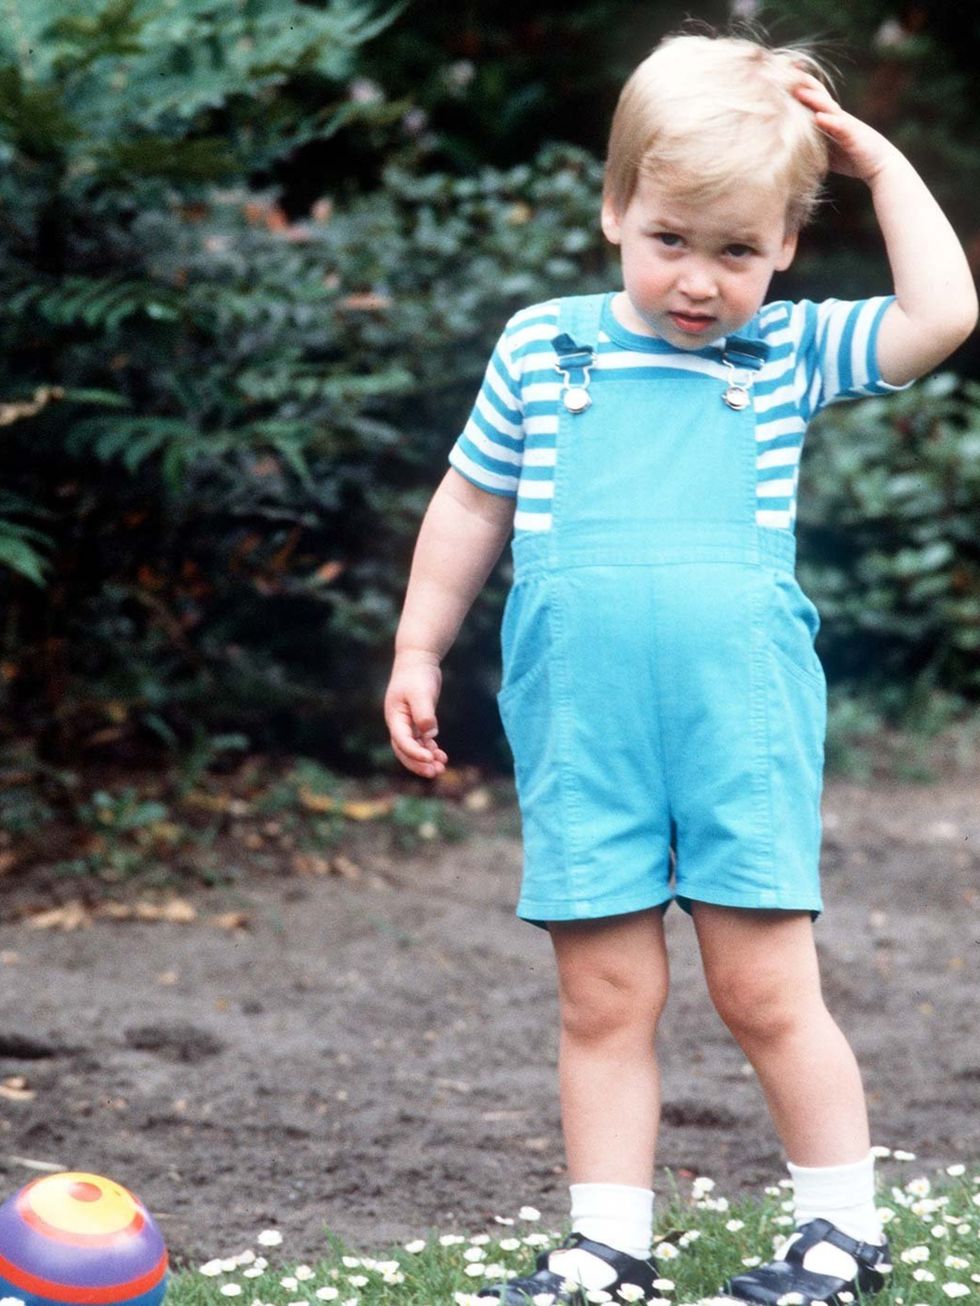 <p><a href="http://www.elleuk.com/star-style/celebrity-style-files/prince-william-elle-man-of-the-week">Prince William</a> was the first royal baby to wear disposable nappies.</p><p><em>Prince William in 1984, aged two.</em></p><p><a href="http://www.elle